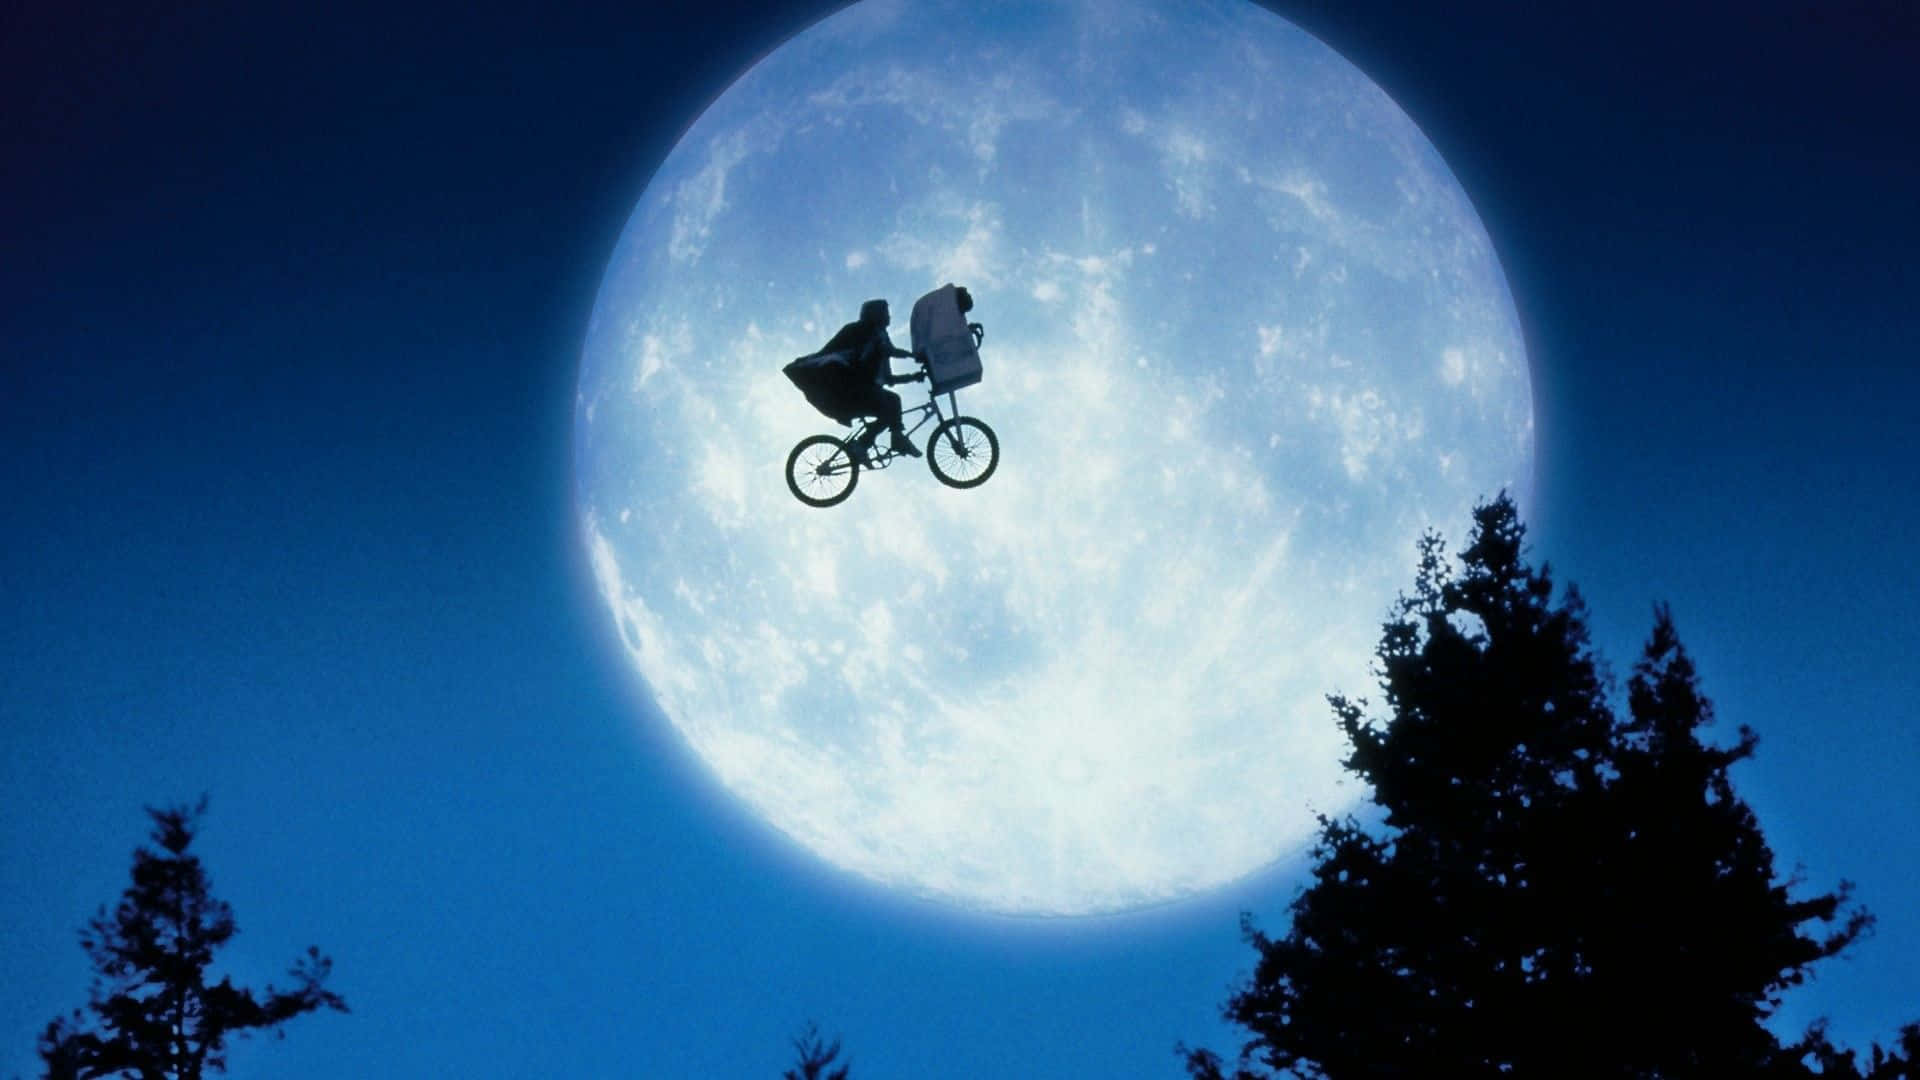 A Man Riding A Bike In Front Of A Full Moon